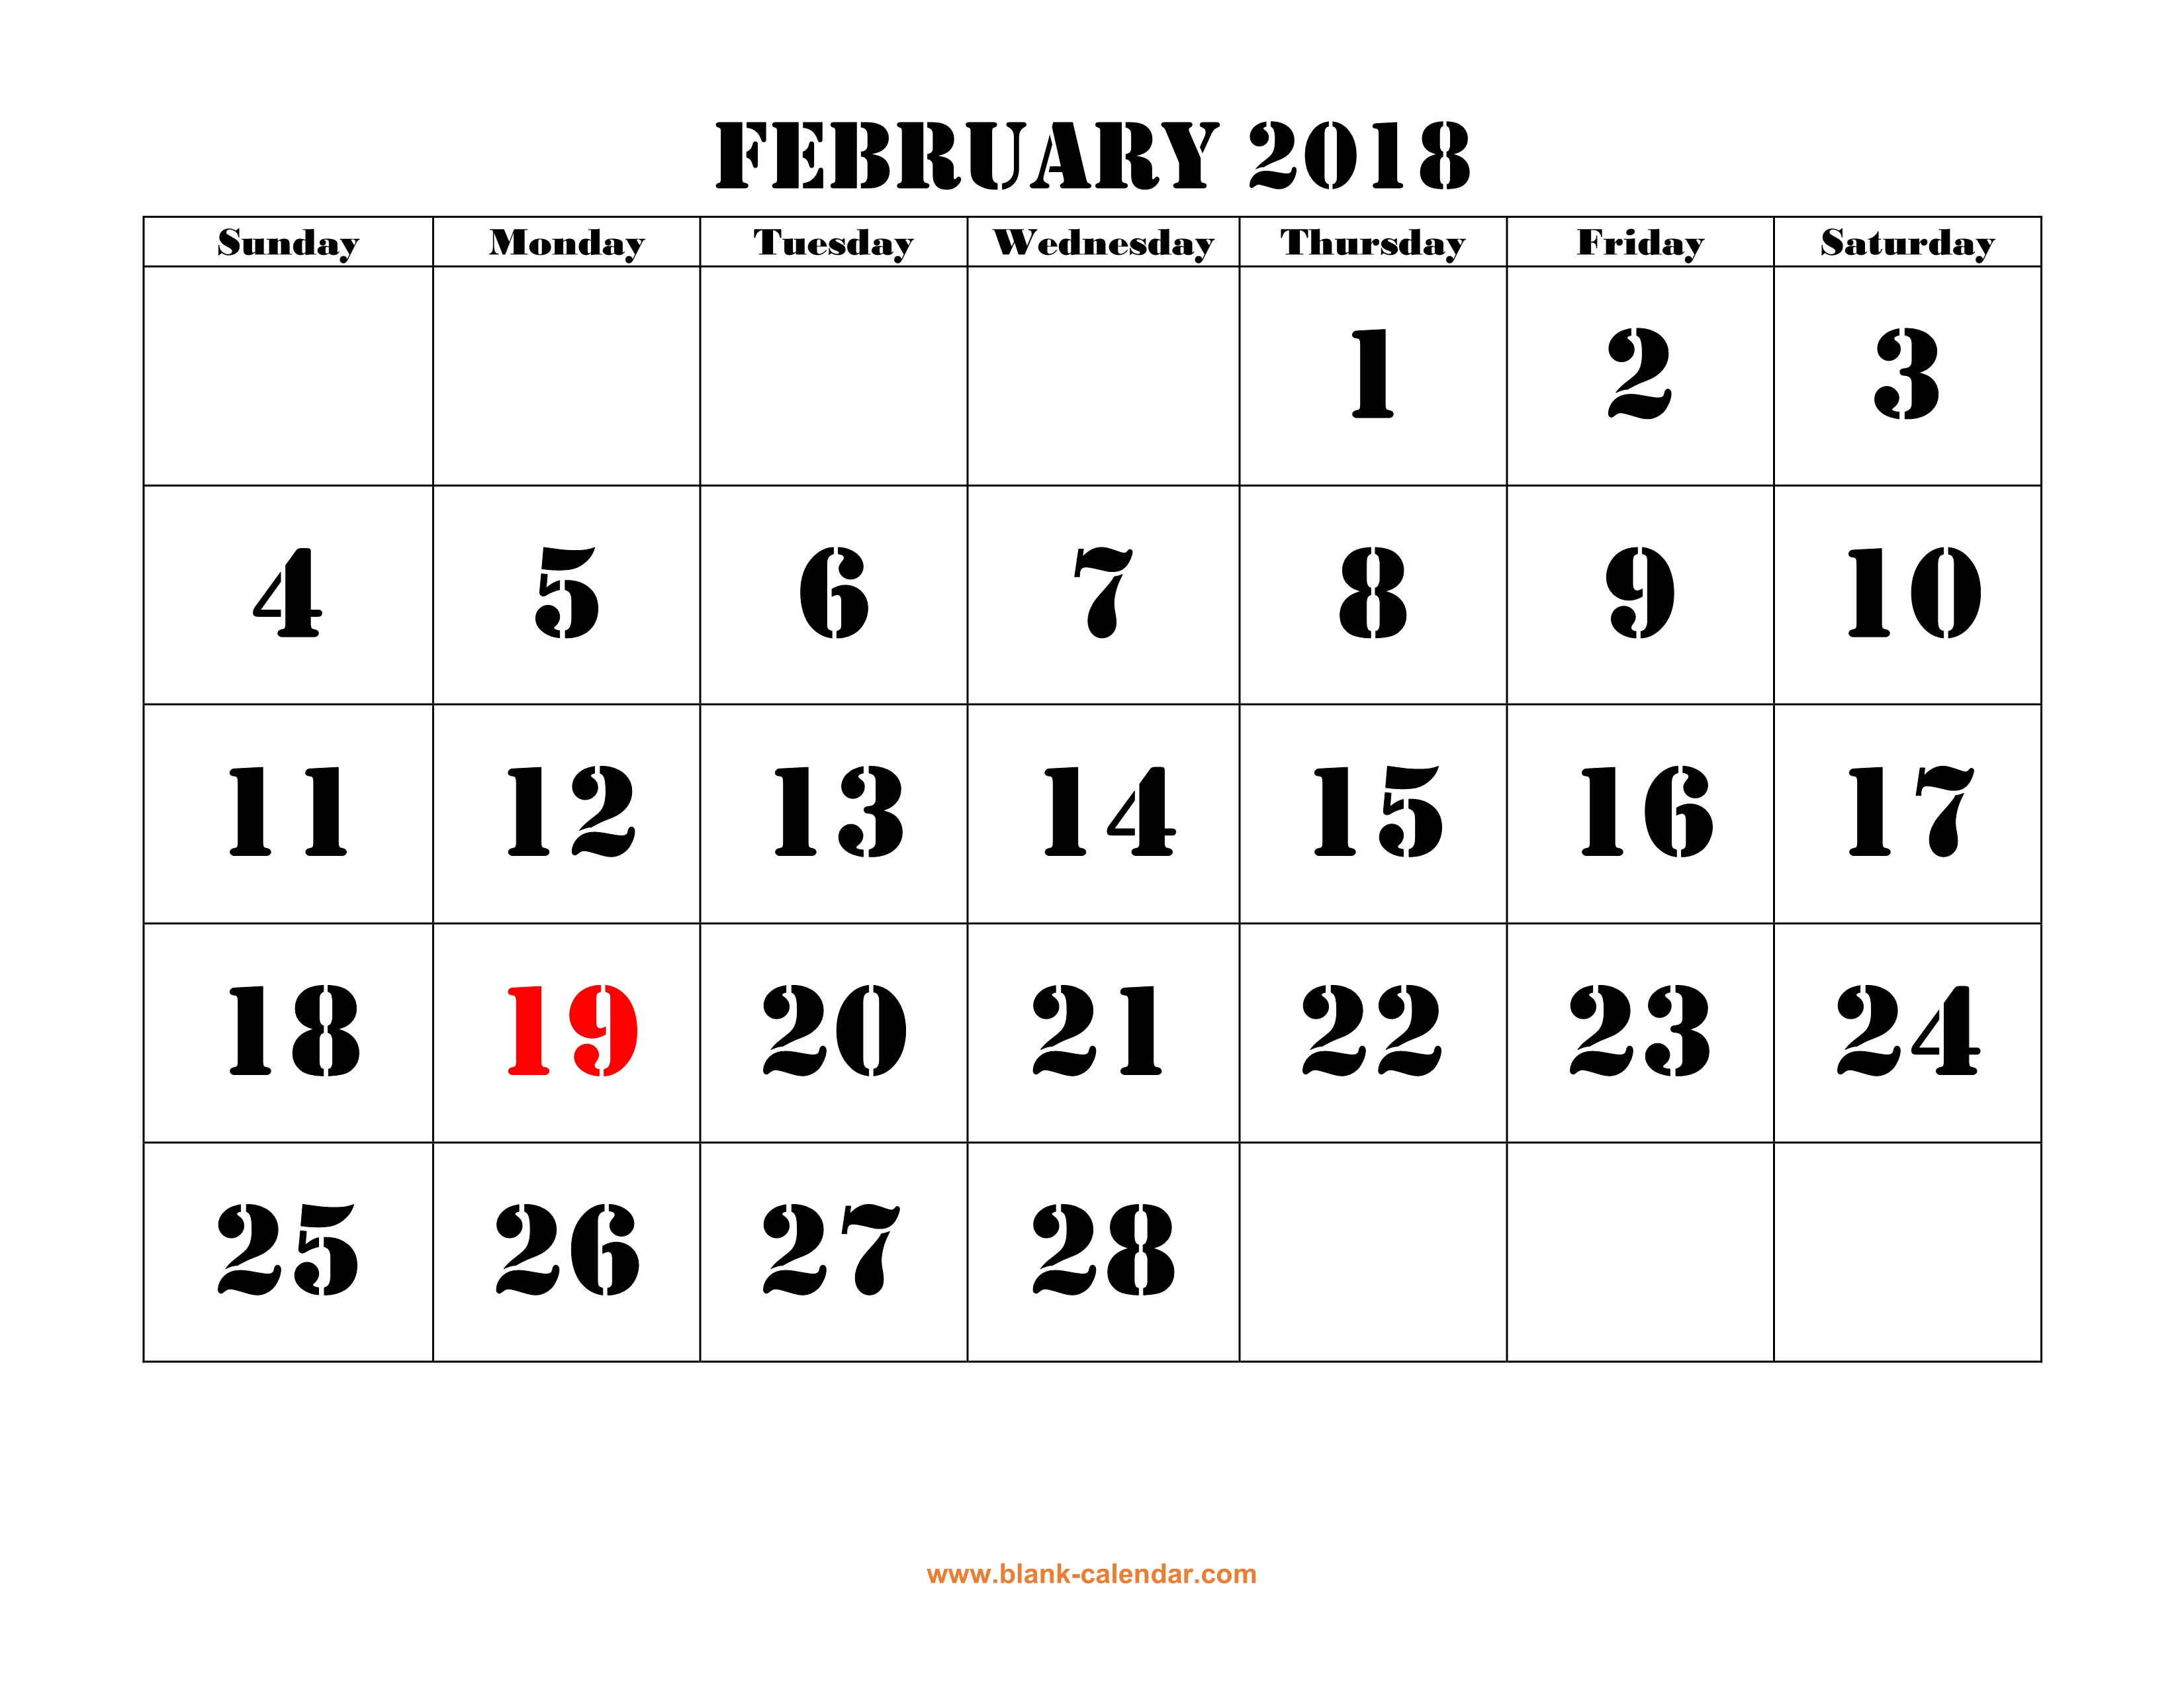 february-2018-calendar-with-holidays-as-picture